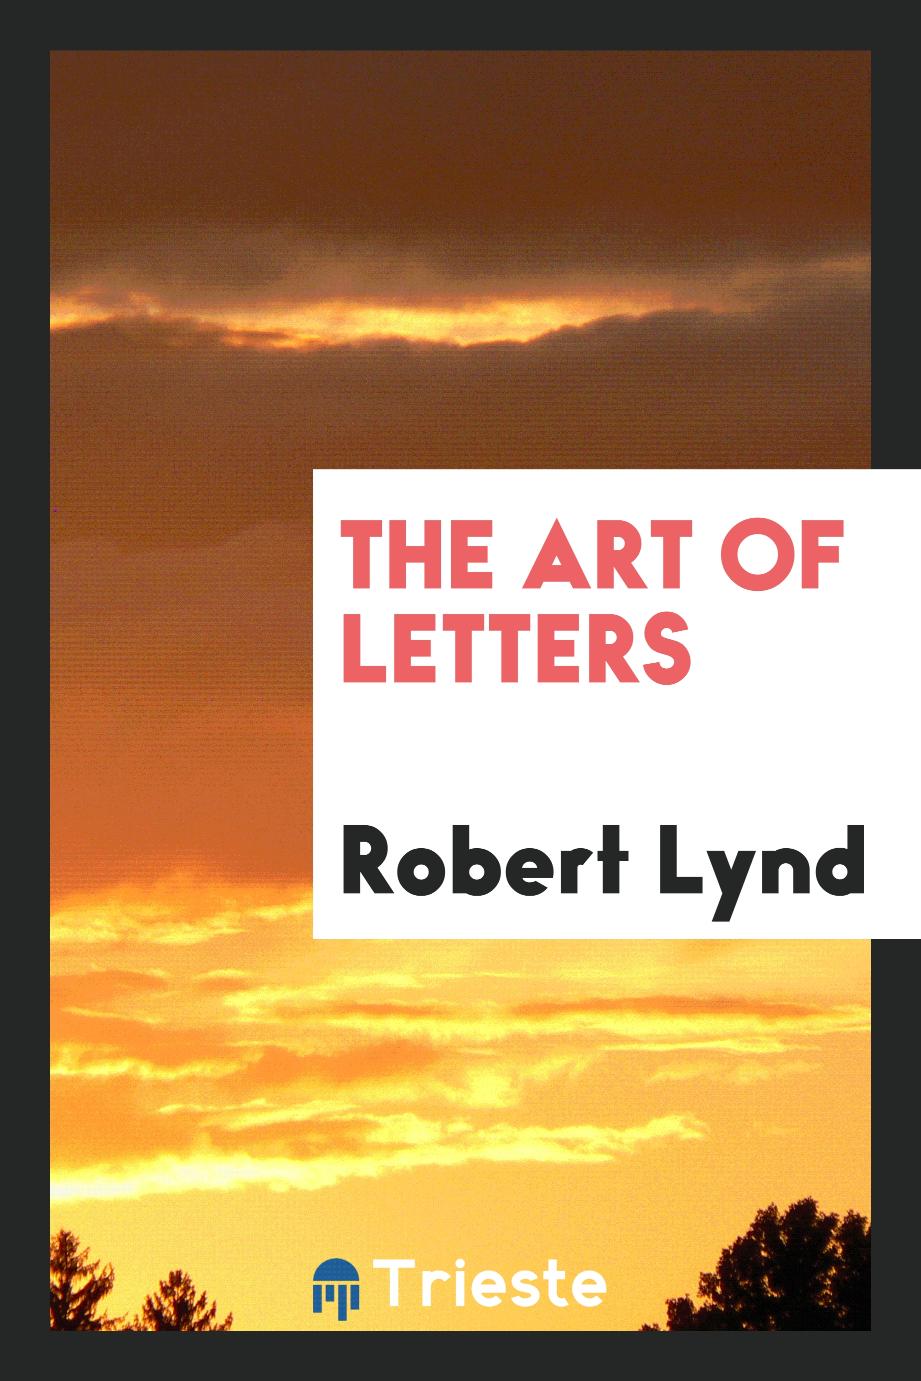 The art of letters